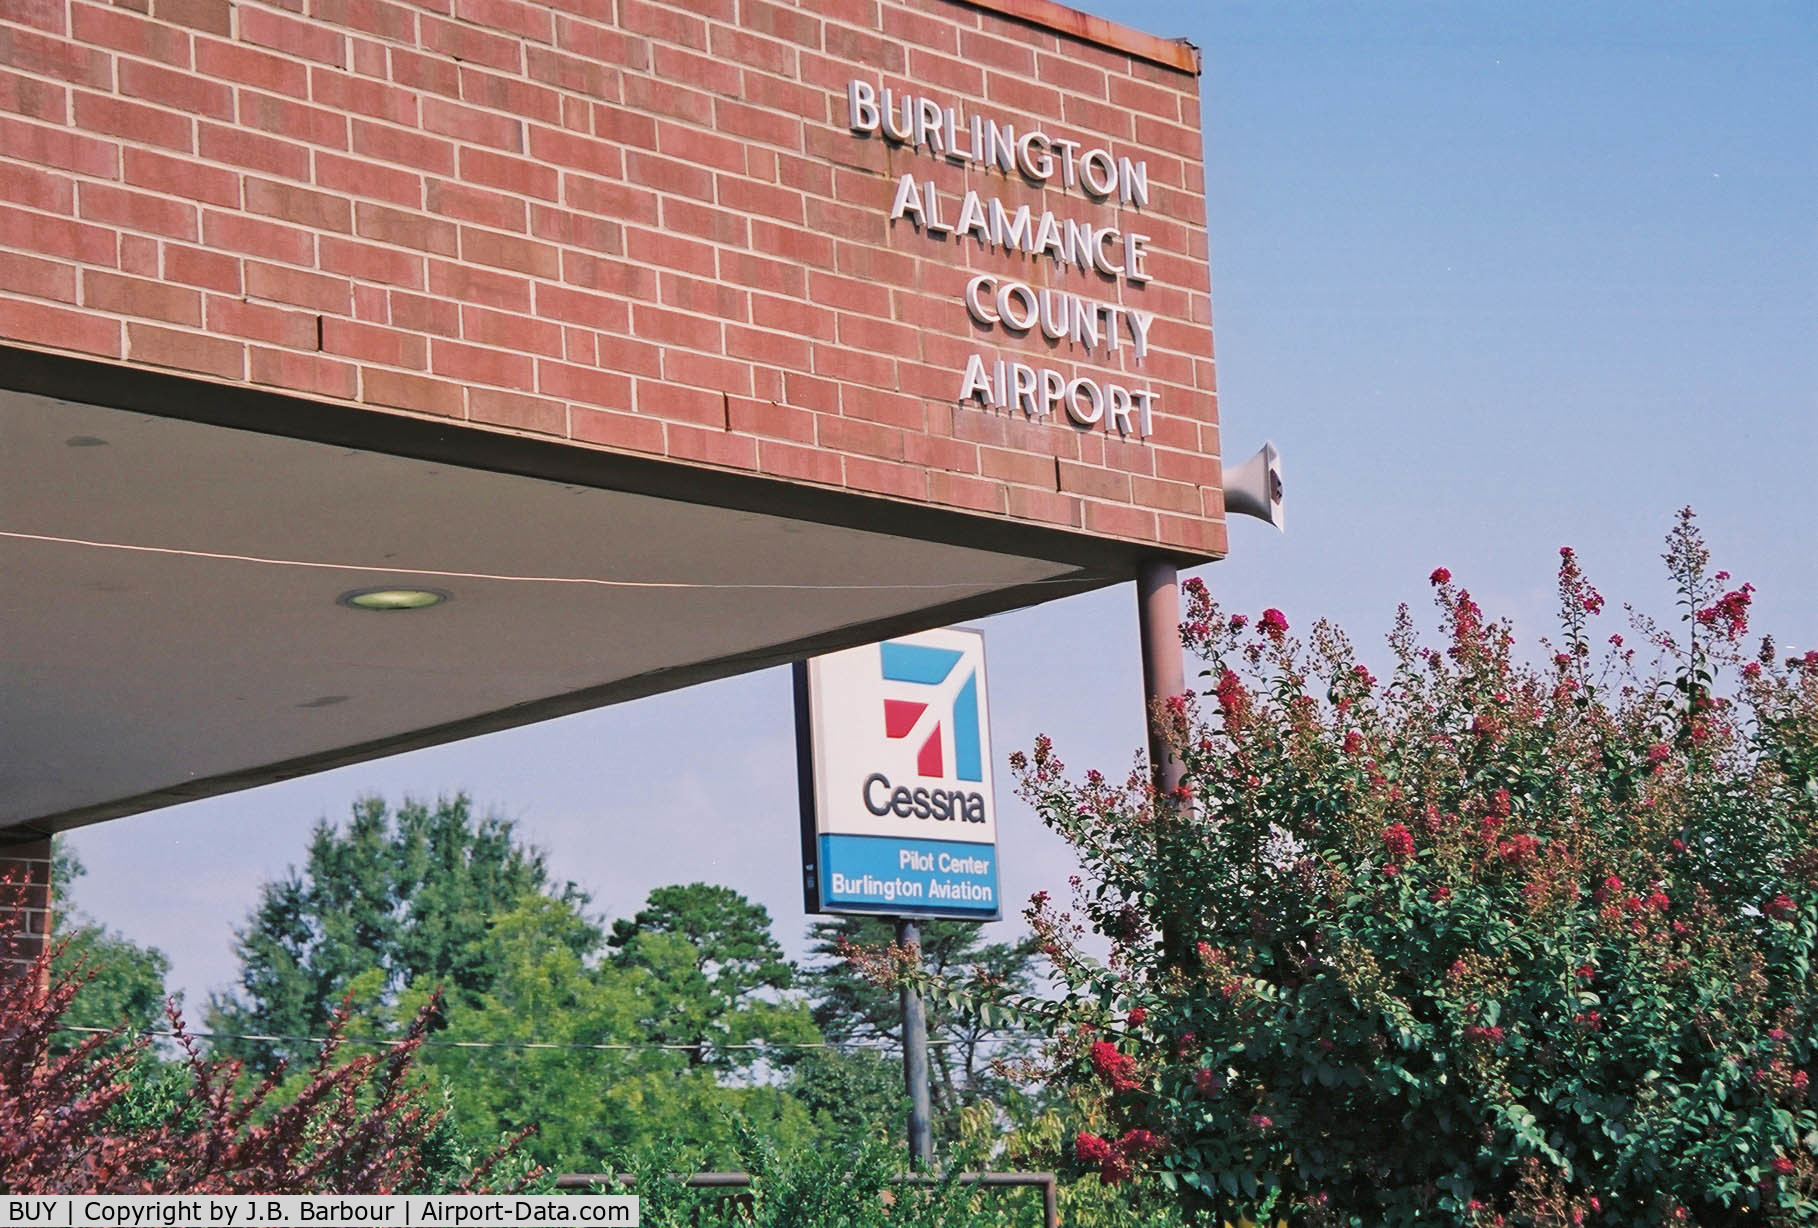 Burlington-alamance Regional Airport (BUY) - Clean facility- The staff were great.  Thanks.